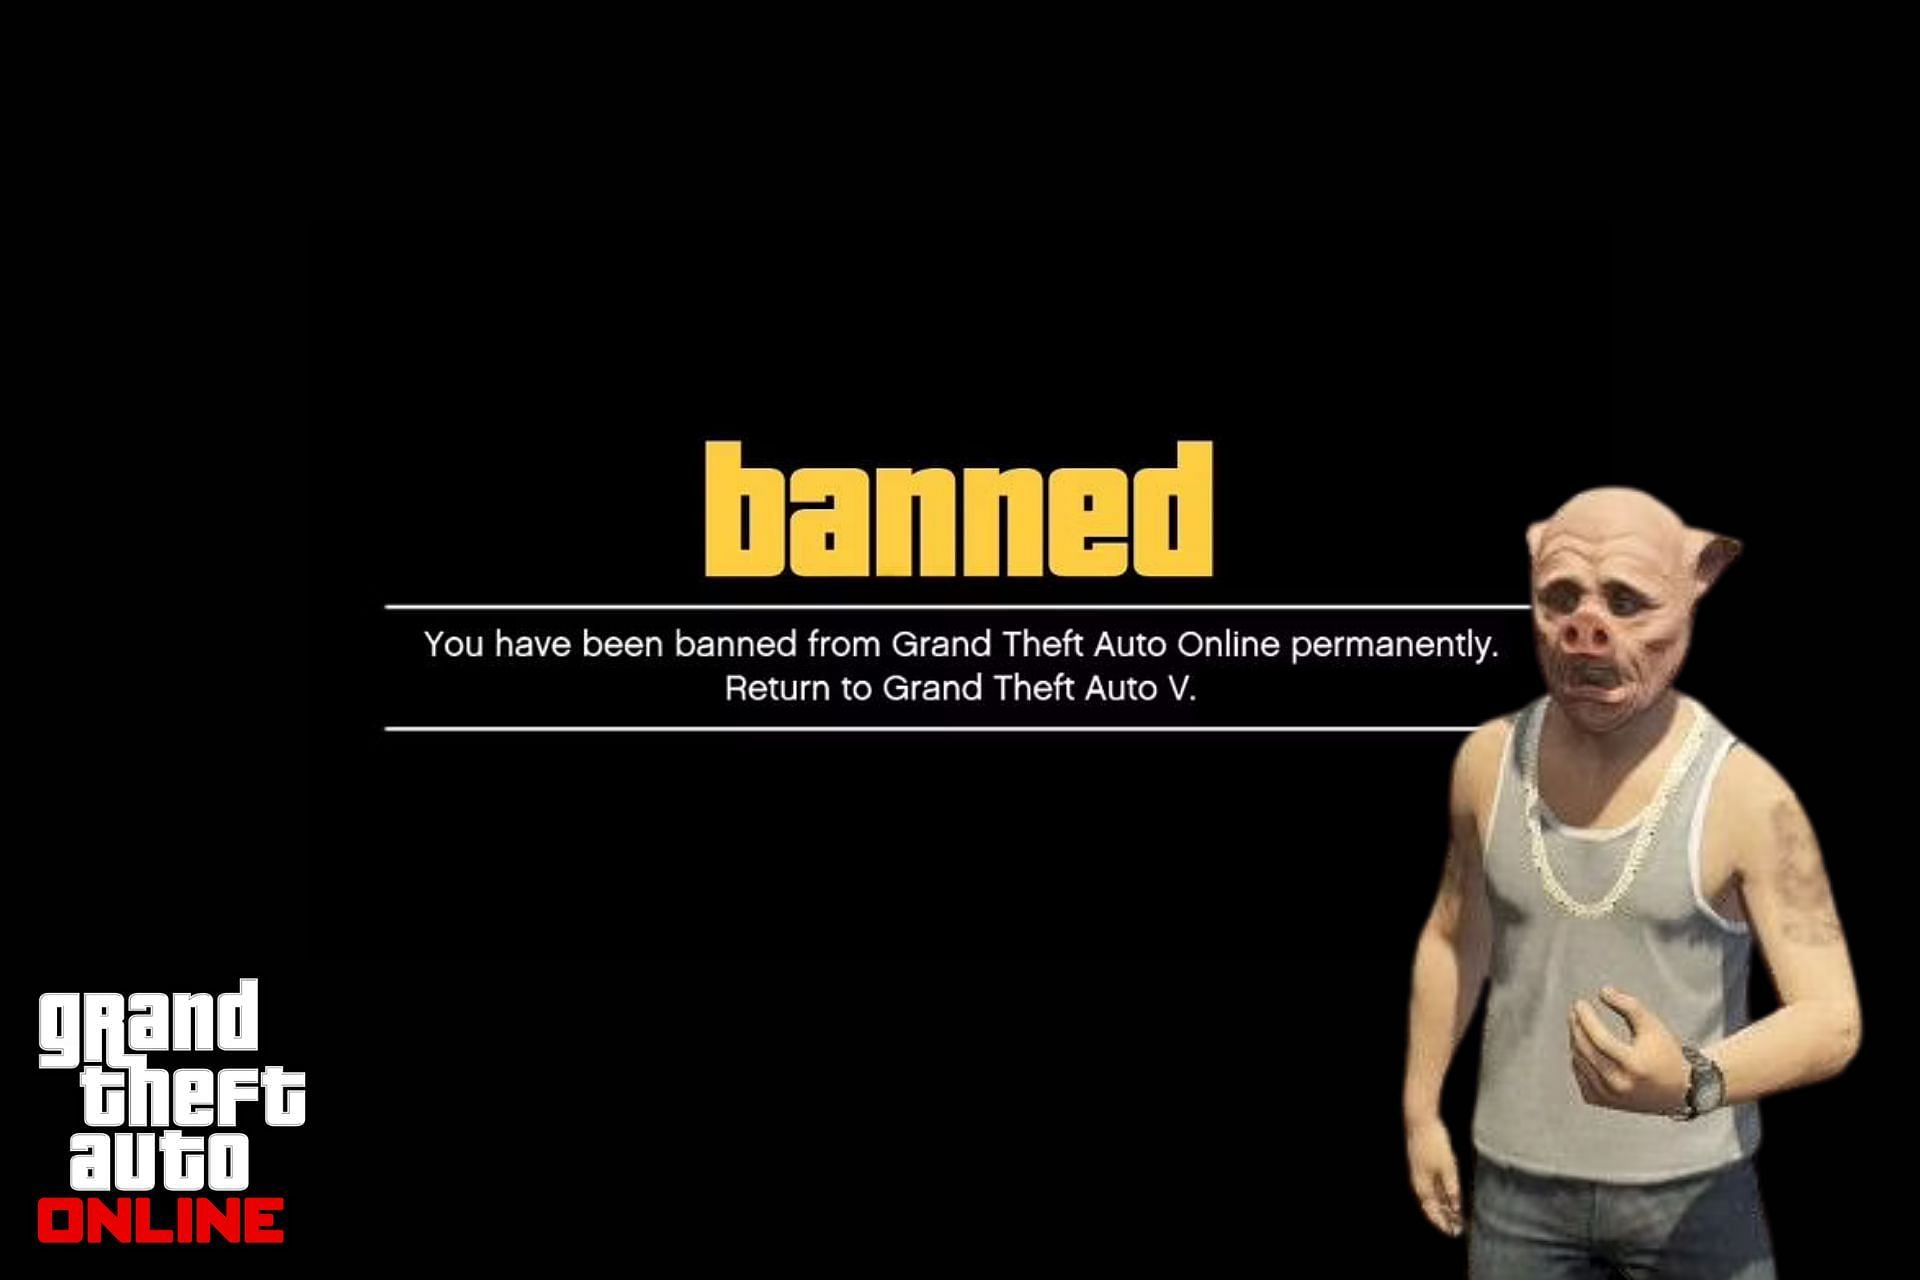 Grand Theft Auto Online has strict rules which, if not followed, can get players banned (Images via Rockstar Game)